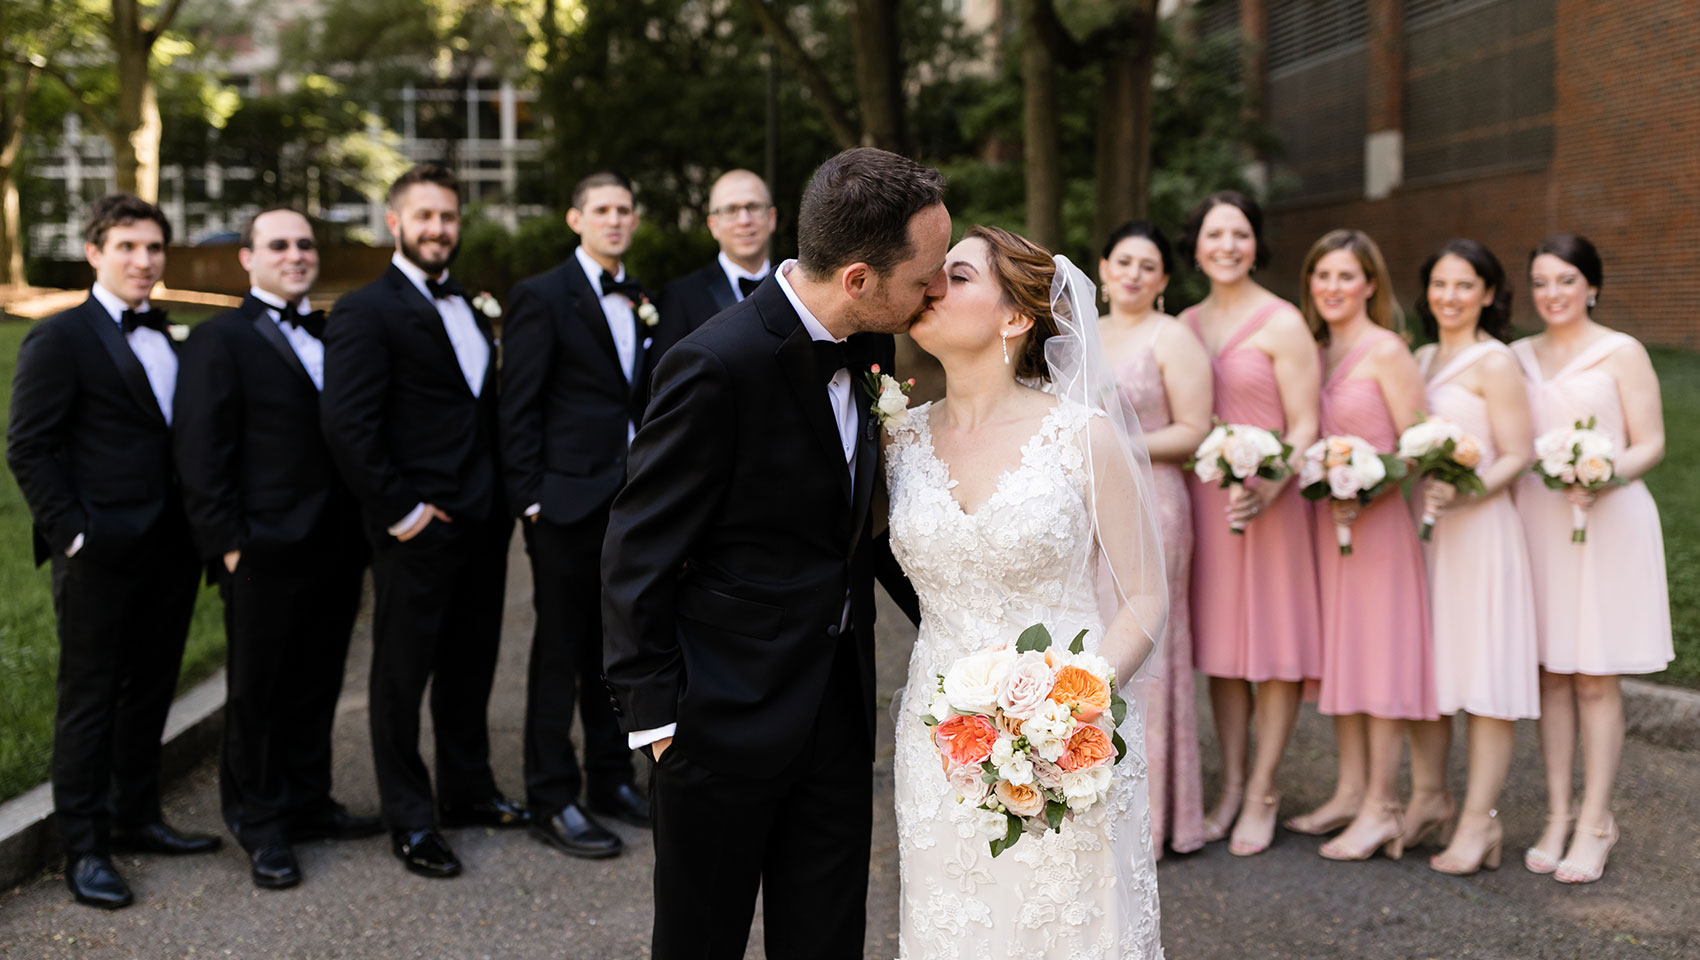 Bride and groom kissing in front of wedding party